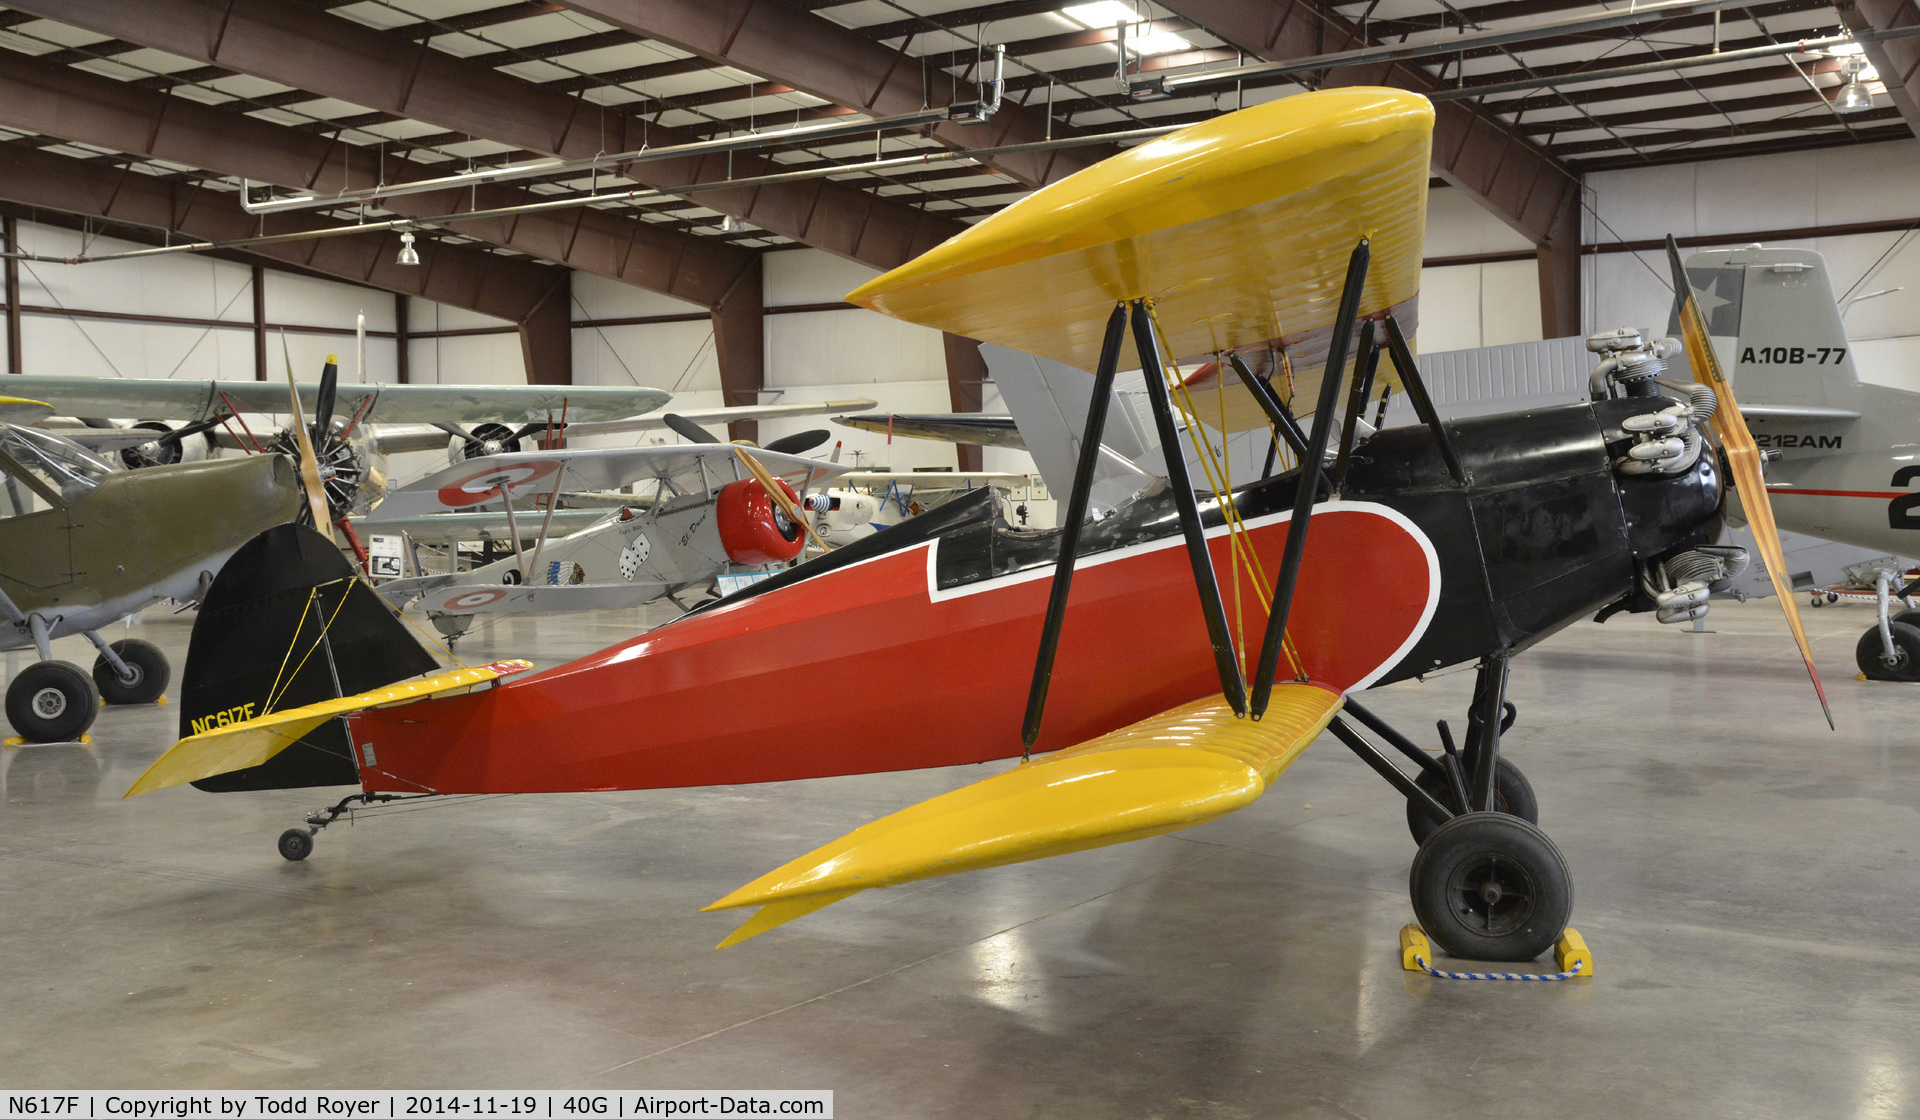 N617F, 1929 Fleet Model 2 C/N 193, On display at the Planes of Fame Valle location